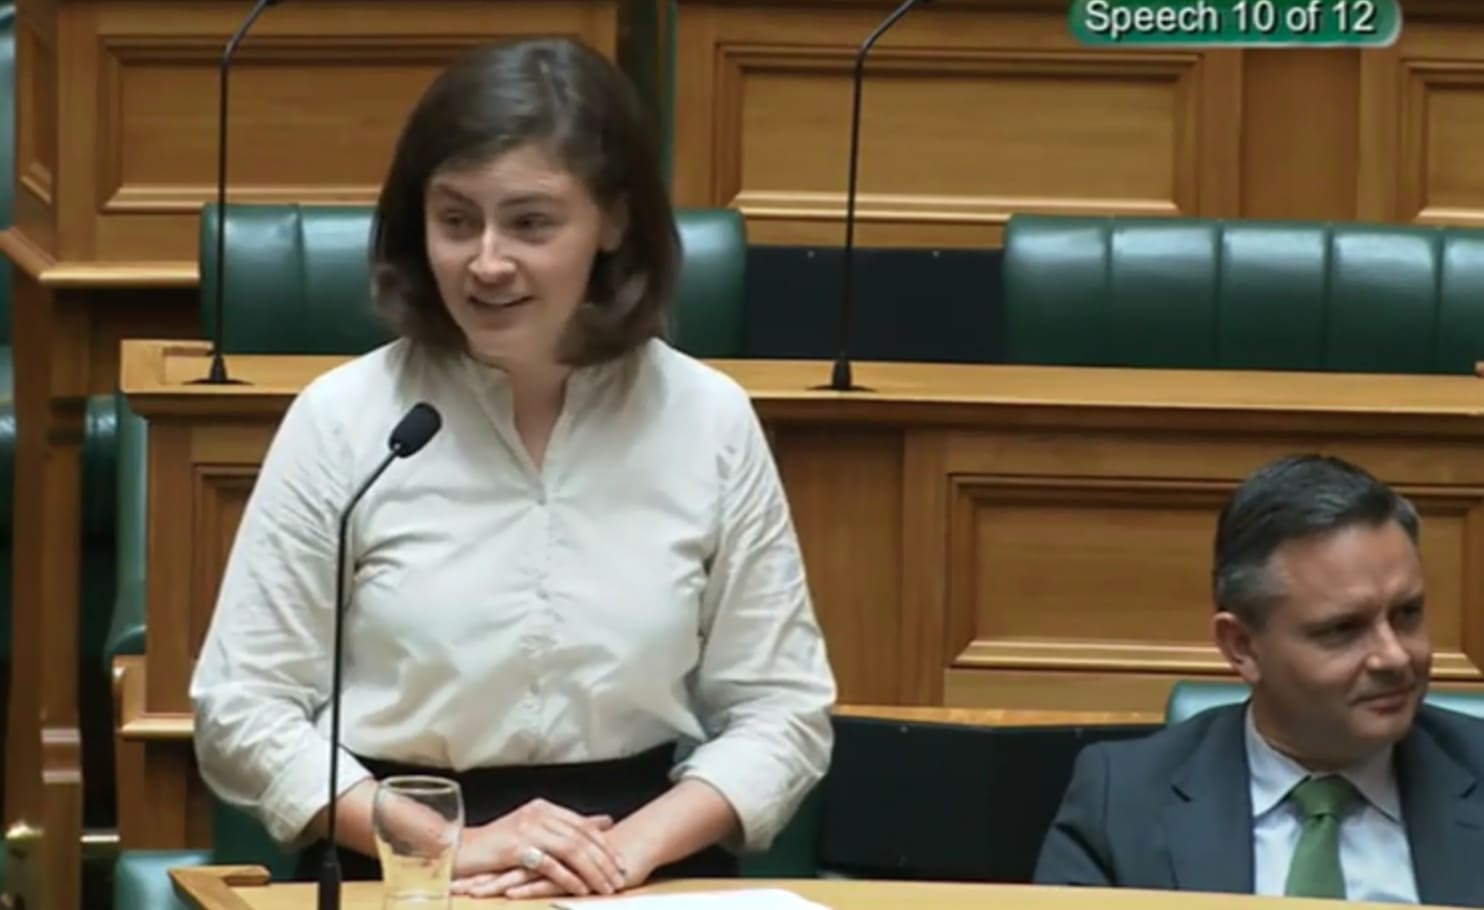 Green MP Chlöe Swarbrick speaking in parliament and responding to heckling with 'okay, Boomer'.